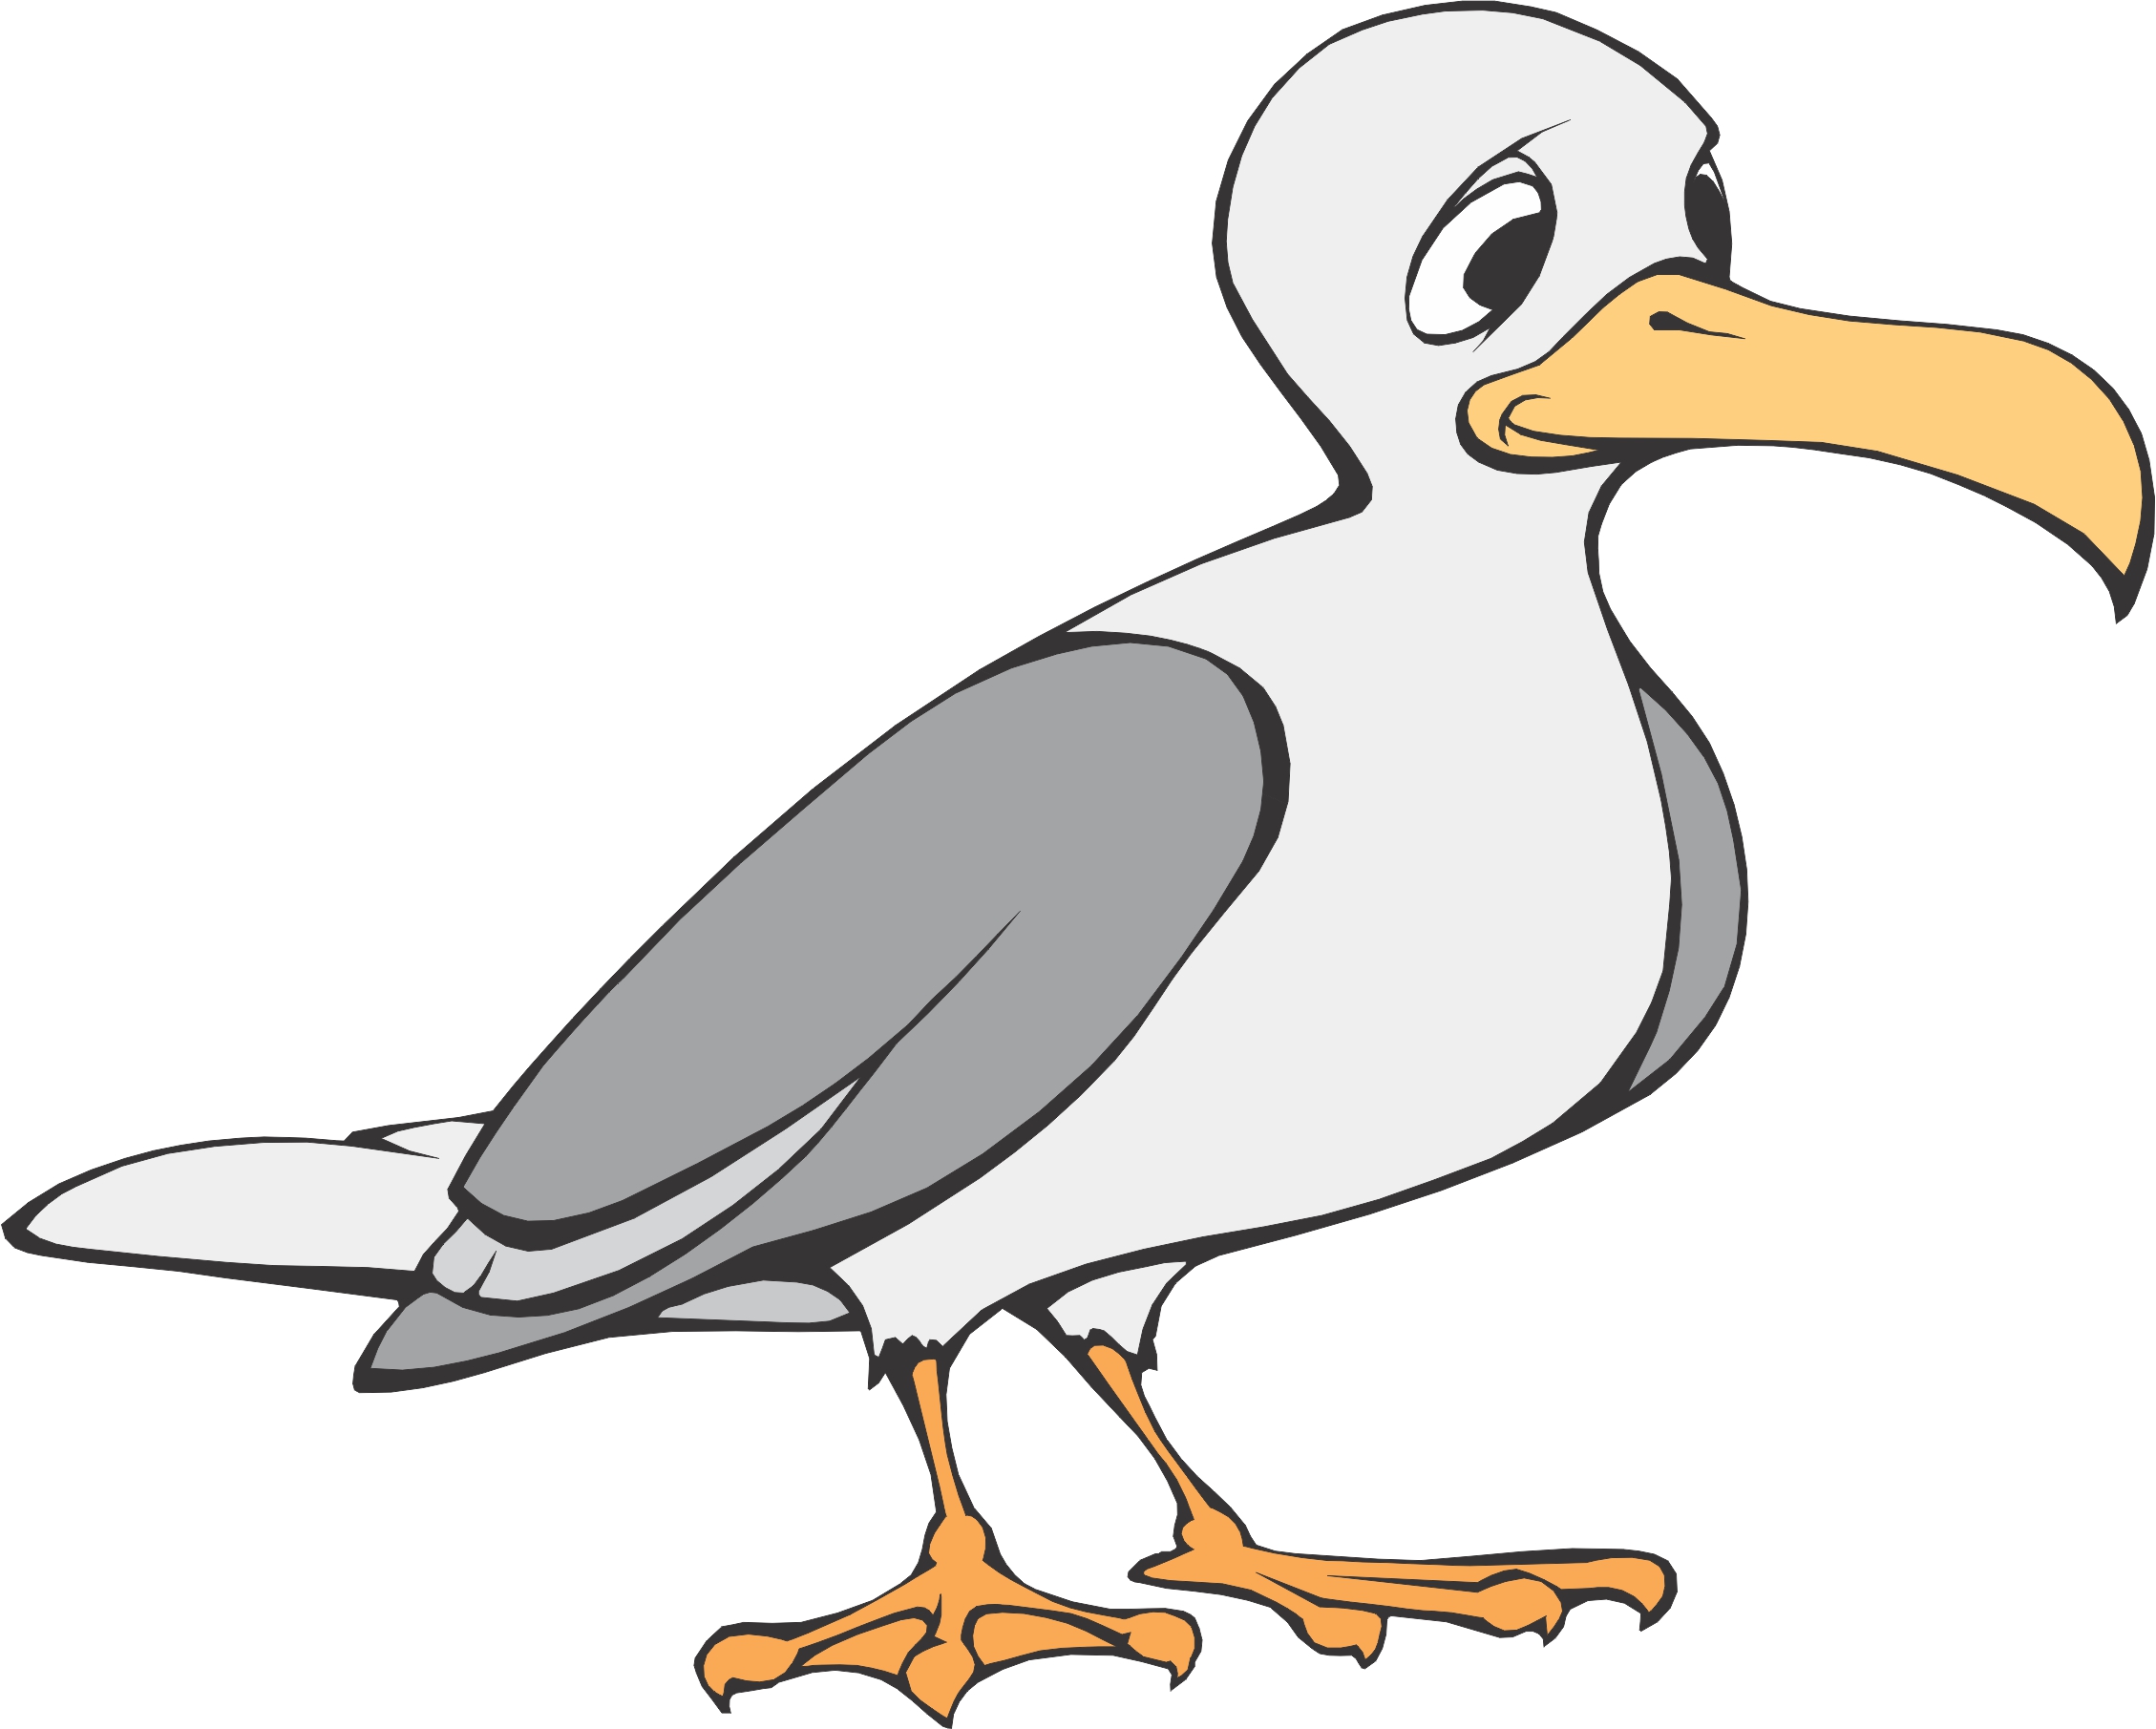 Seagull clipart free images 3